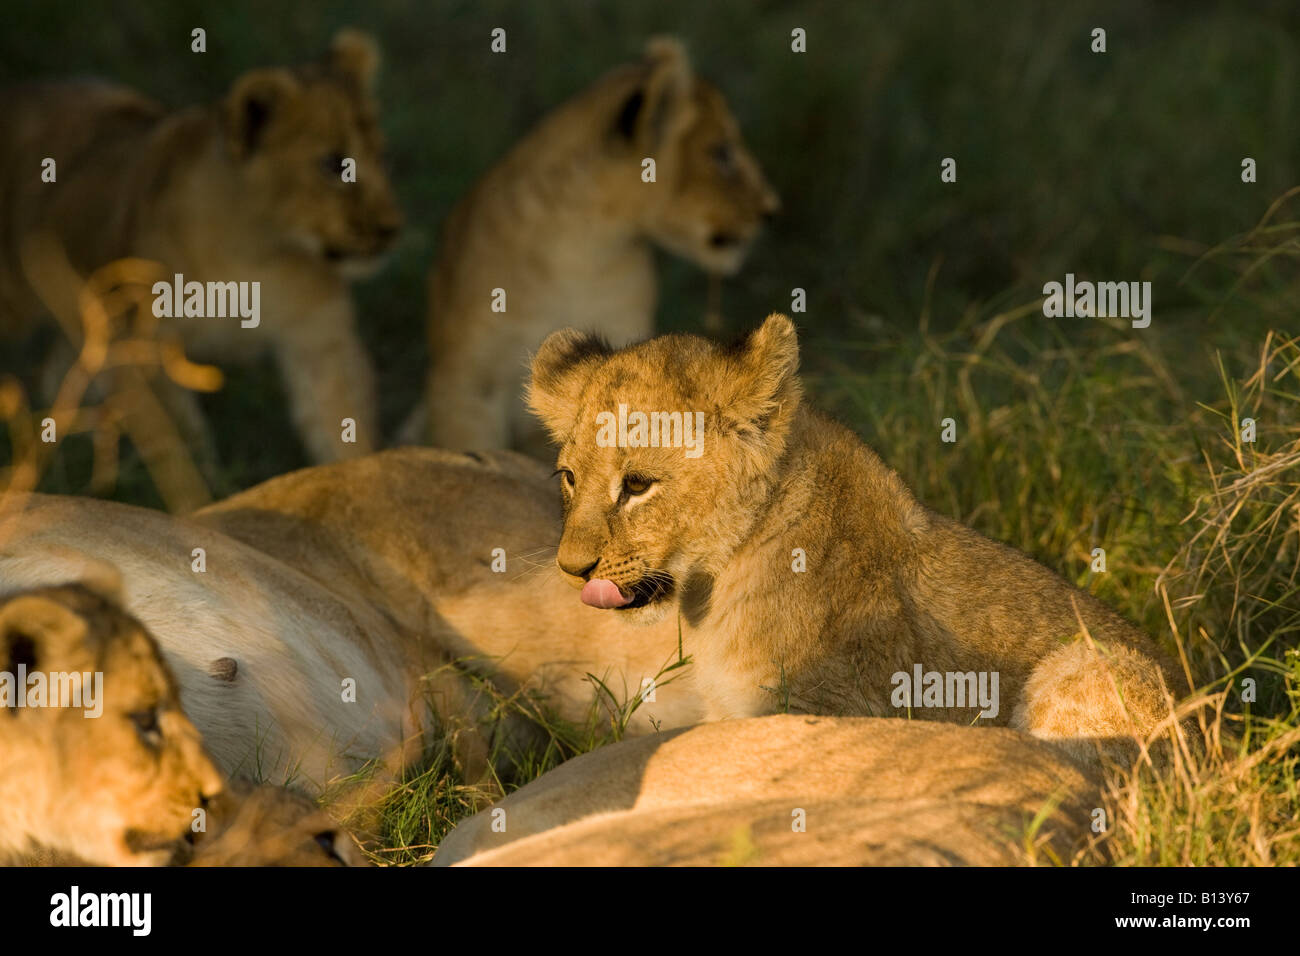 Humorous portrait of lions, Panthera Leo, adult resting and cub playing, tongue out, in warm sunlight of Okavango Delta Botswana Africa Stock Photo